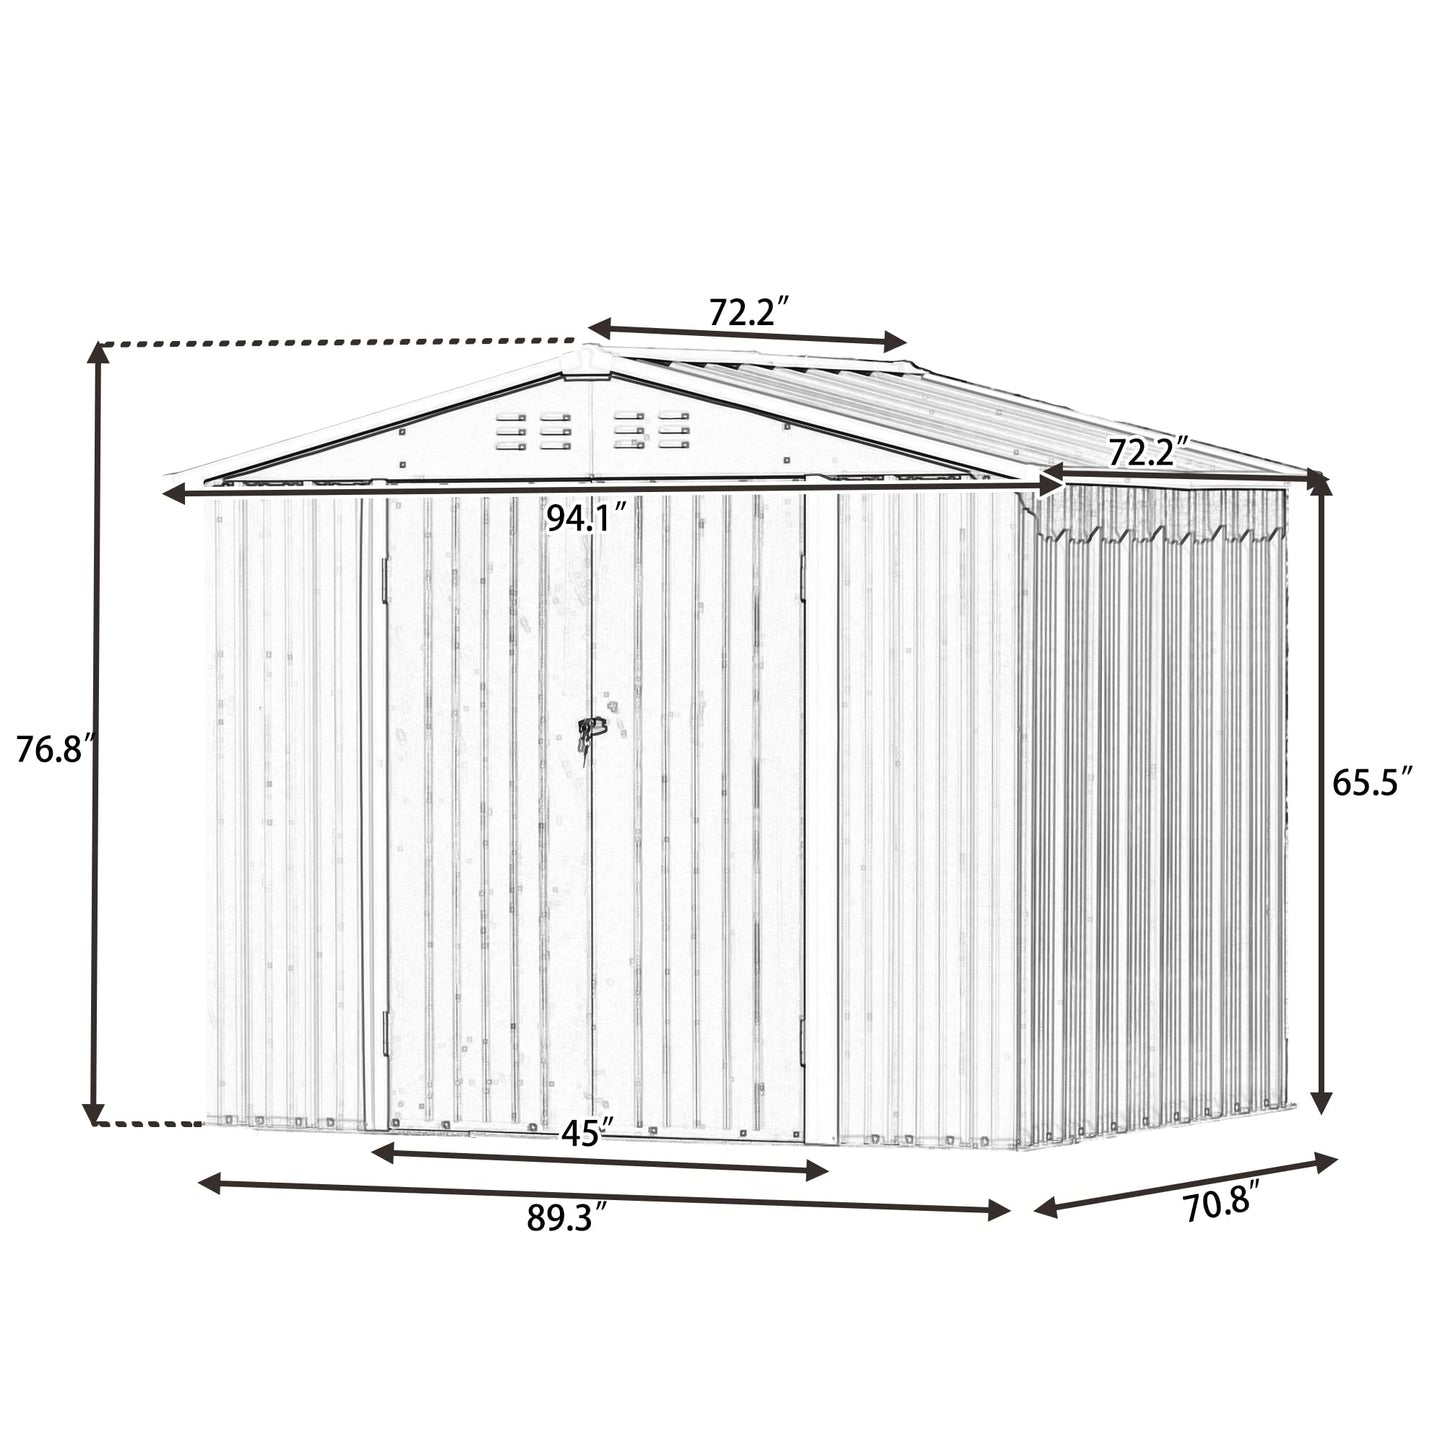 DHPM 8x6 FT Metal Outside Sheds & Outdoor Storage,Outdoor Storage Shed,Galvanized Steel for Backyard, Patio, Lawn, Tool Shed with Lockable Door for Trash Can, Bike, Lawnmower Gray-8ftx6ft